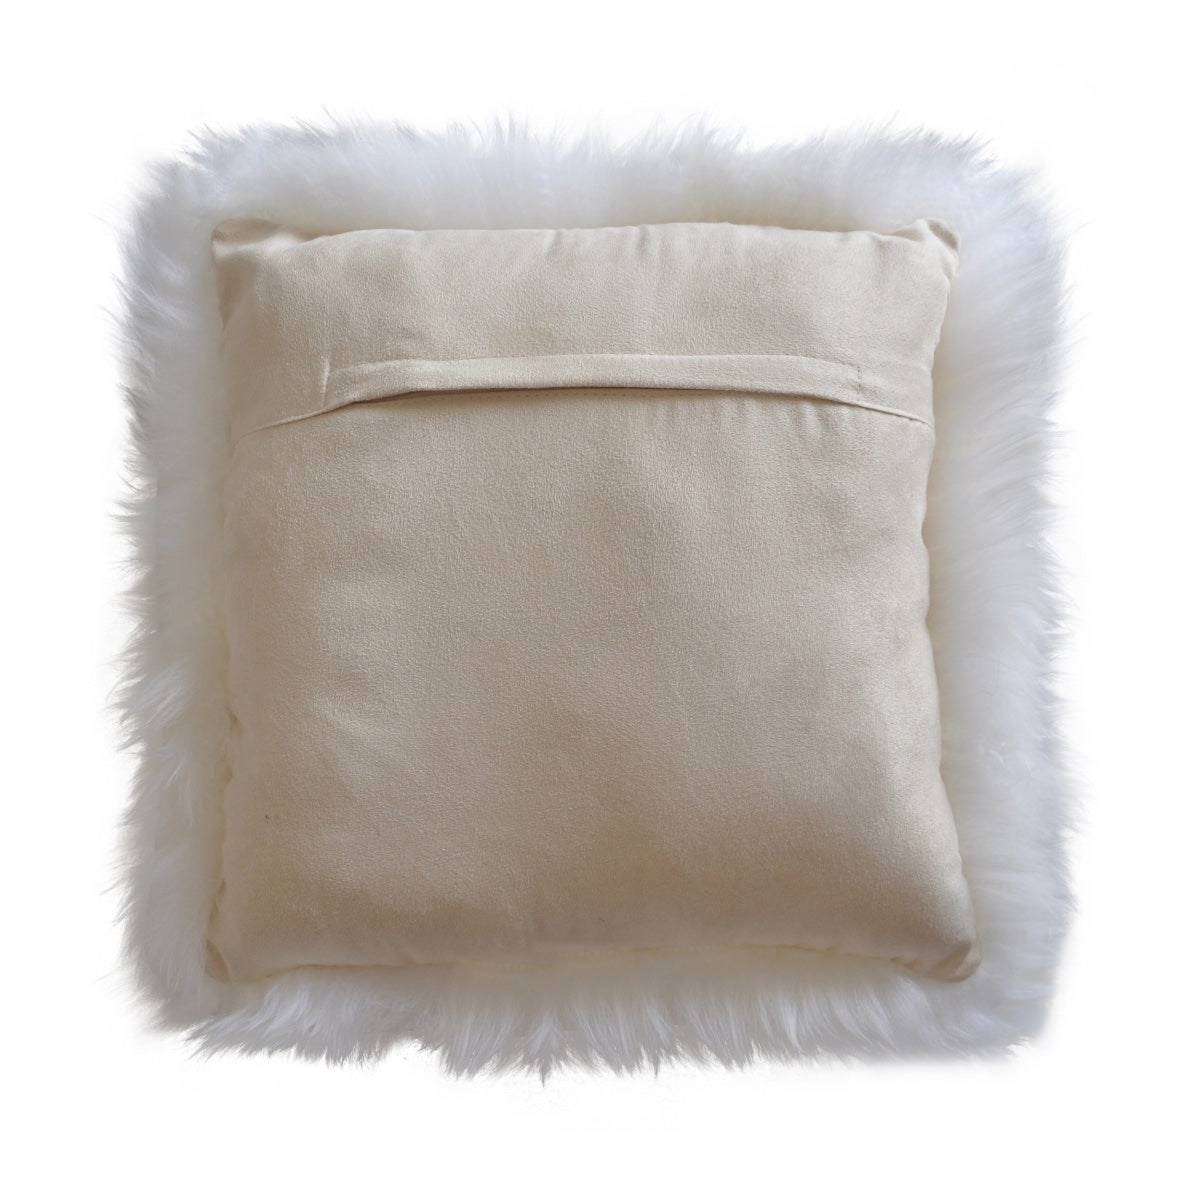 Ivory Wool Sheepskin Square Cushion Cover 40cm - Microsuede